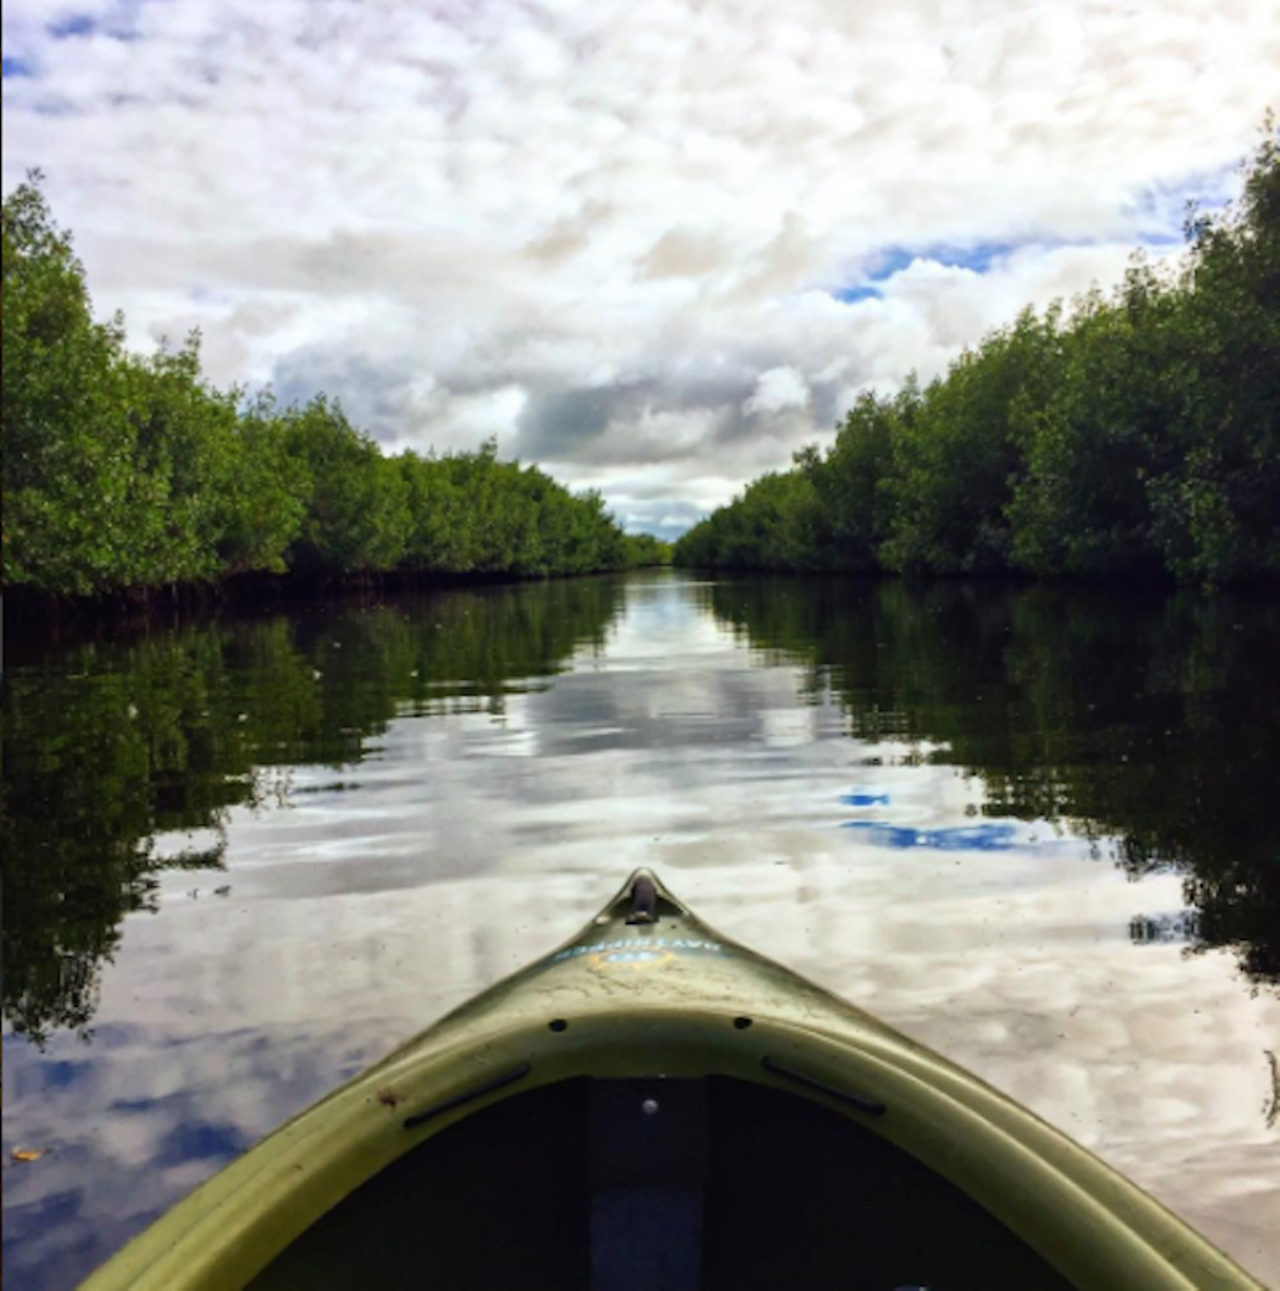 Collier-Seminole State Park
Distance from Orlando: 3 hours 40 minutes
This park offers both a primitive campground and a campground with electricity and water hookups. Campers can go on hiking trails ranging from 0.9 to 6.5 miles long, take a guided canoe trip, or ride on their off-road bicycle course. 
Photo via gggiraffy/Instagram